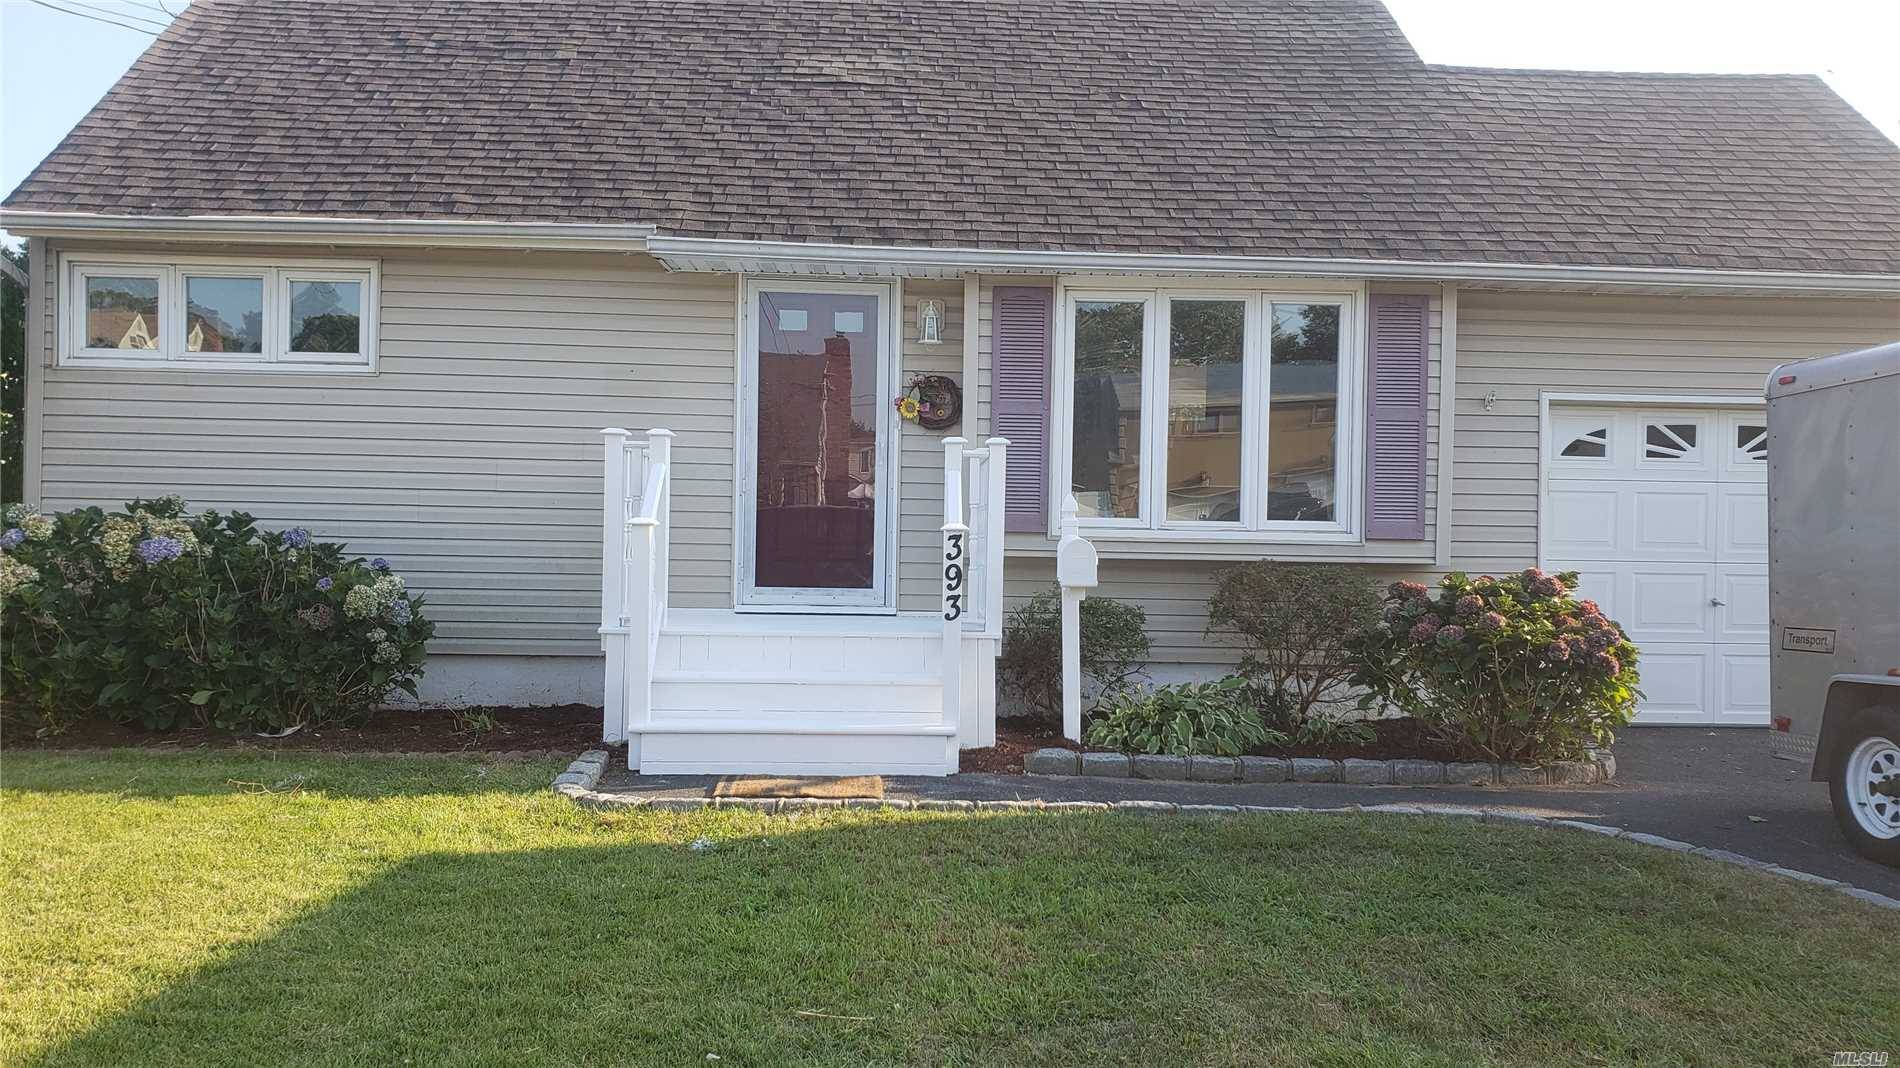 Located In The Village Of Lindenhurst This 4 Bed Room 1 Bath Cape Style House With A 1 Car Garage Is In Clean And Move In Condition.